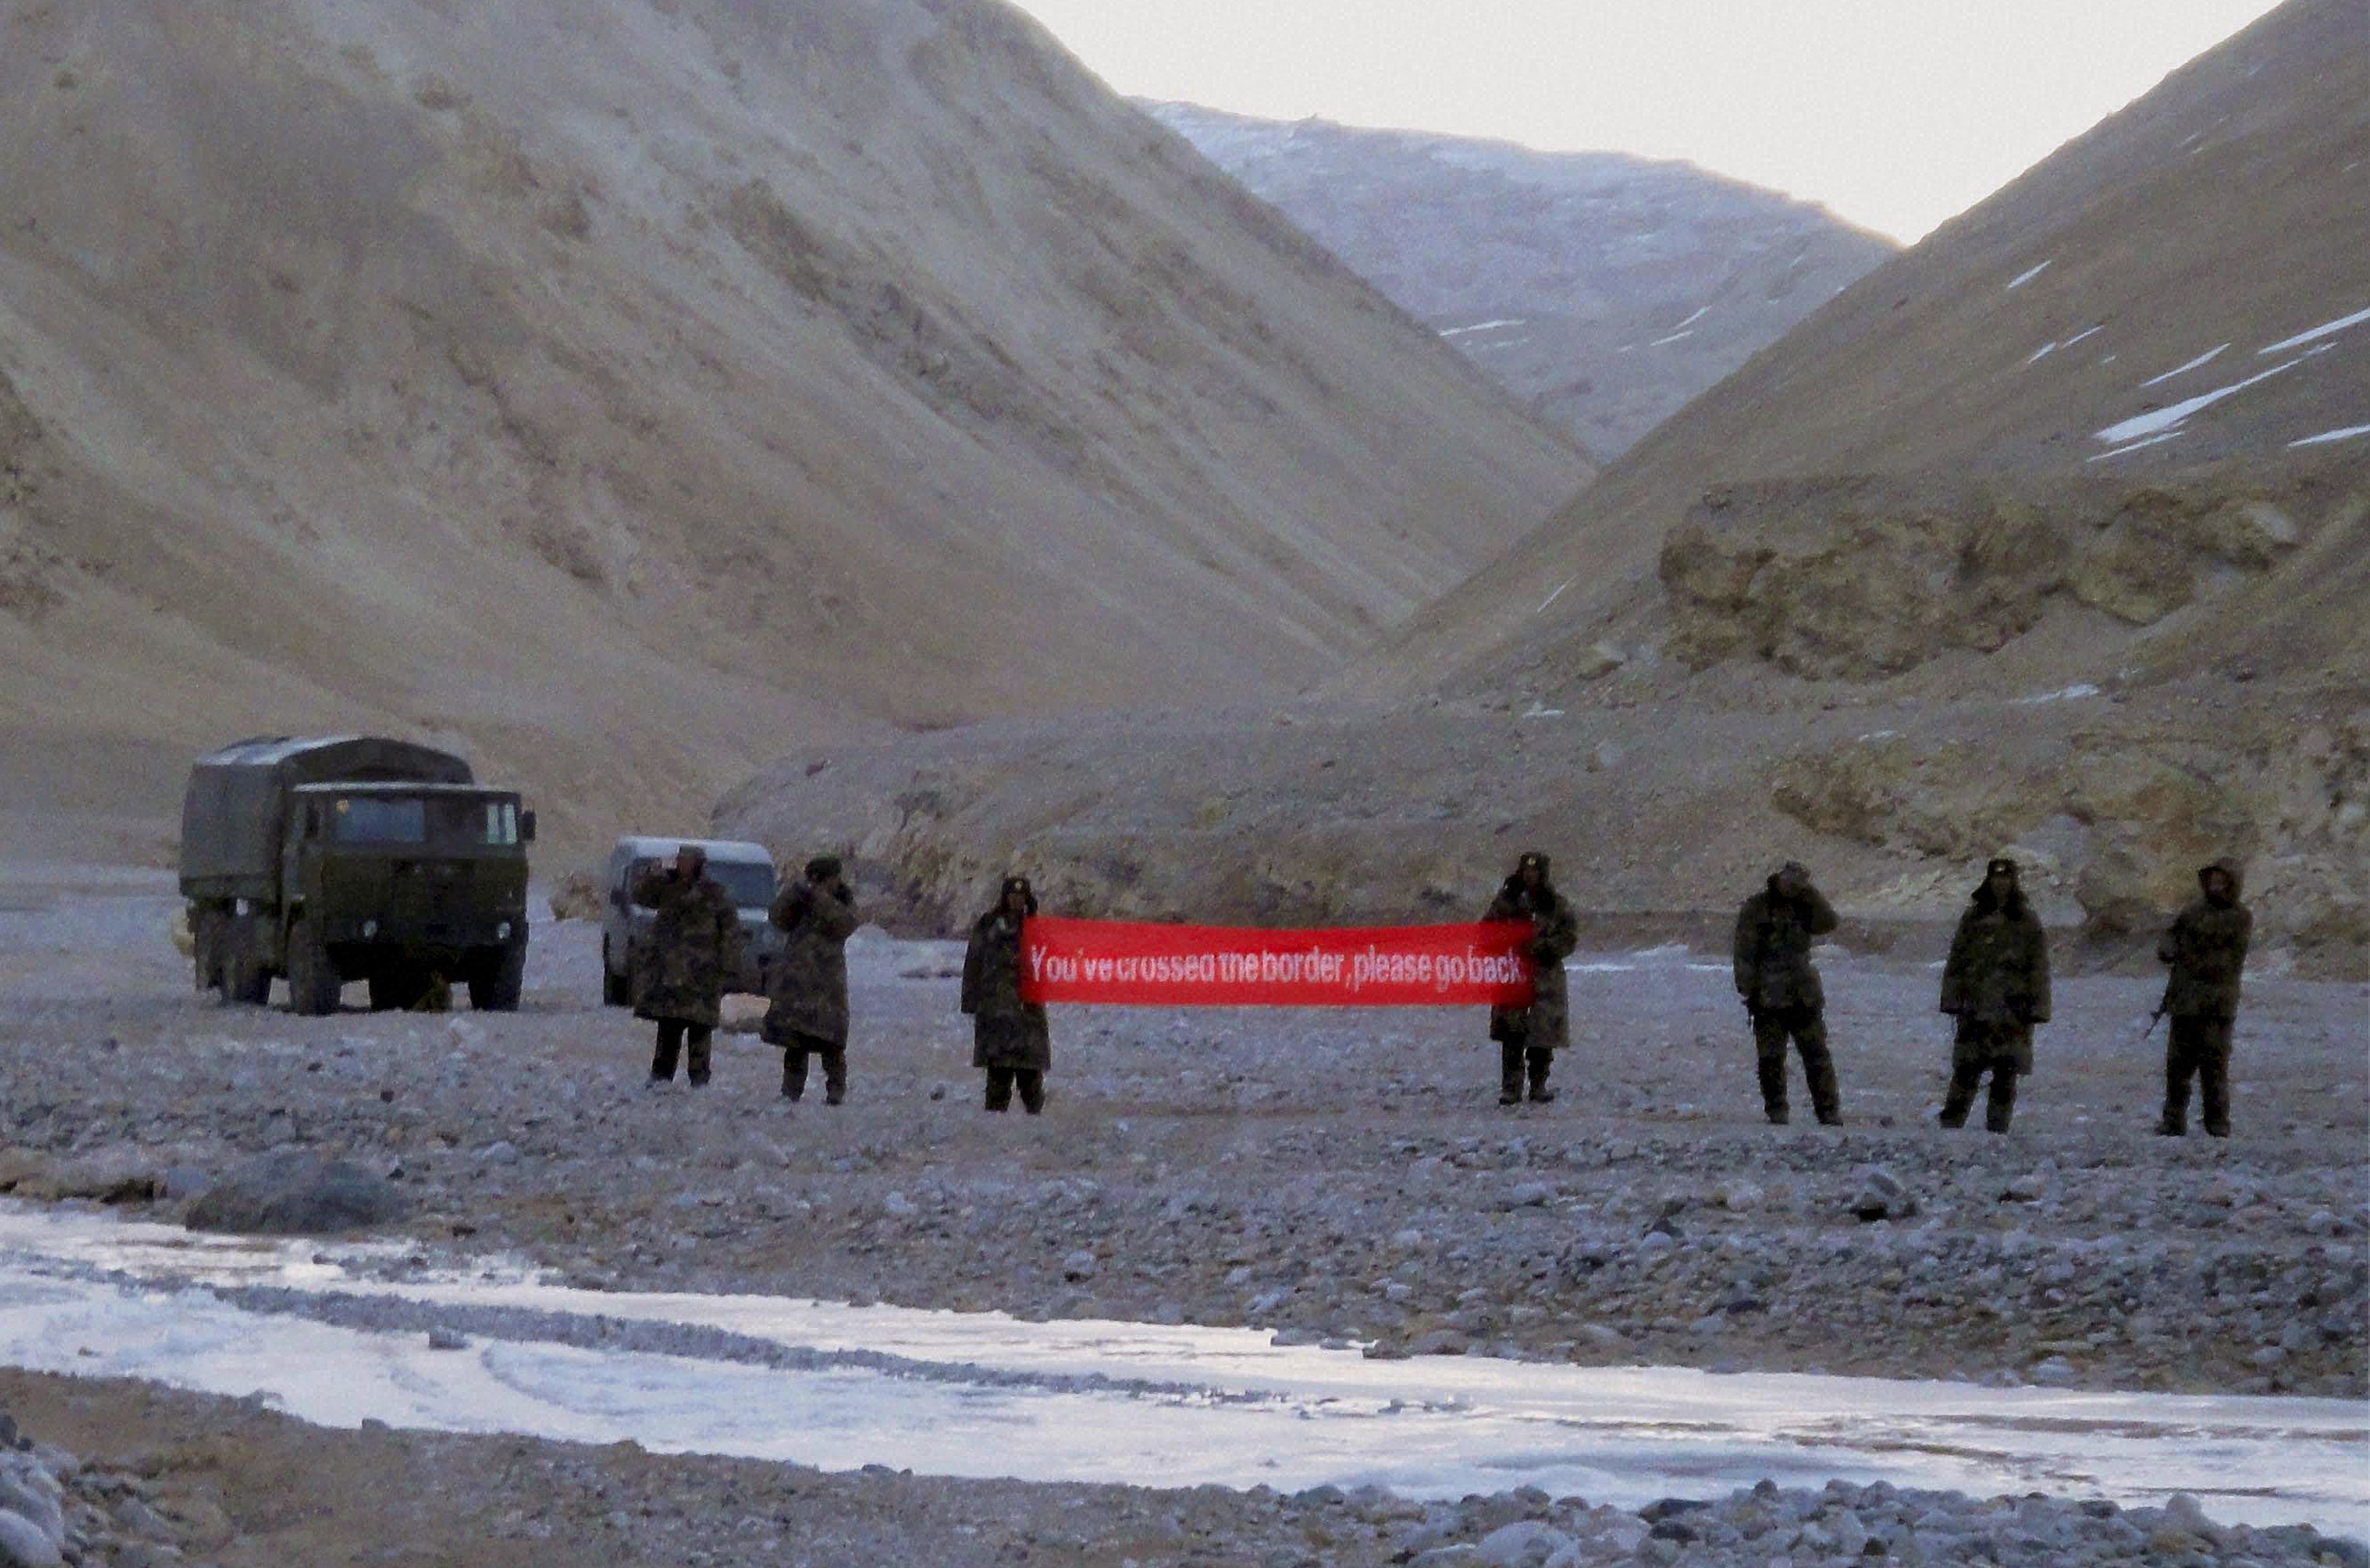 Chinese troops hold a banner which reads “You’ve crossed the border, please go back” in Ladakh, India, in May 2013. Border disputes between the two countries, arguably a result of British colonisation, have simmered for years but recently flared up again. Photo: AP